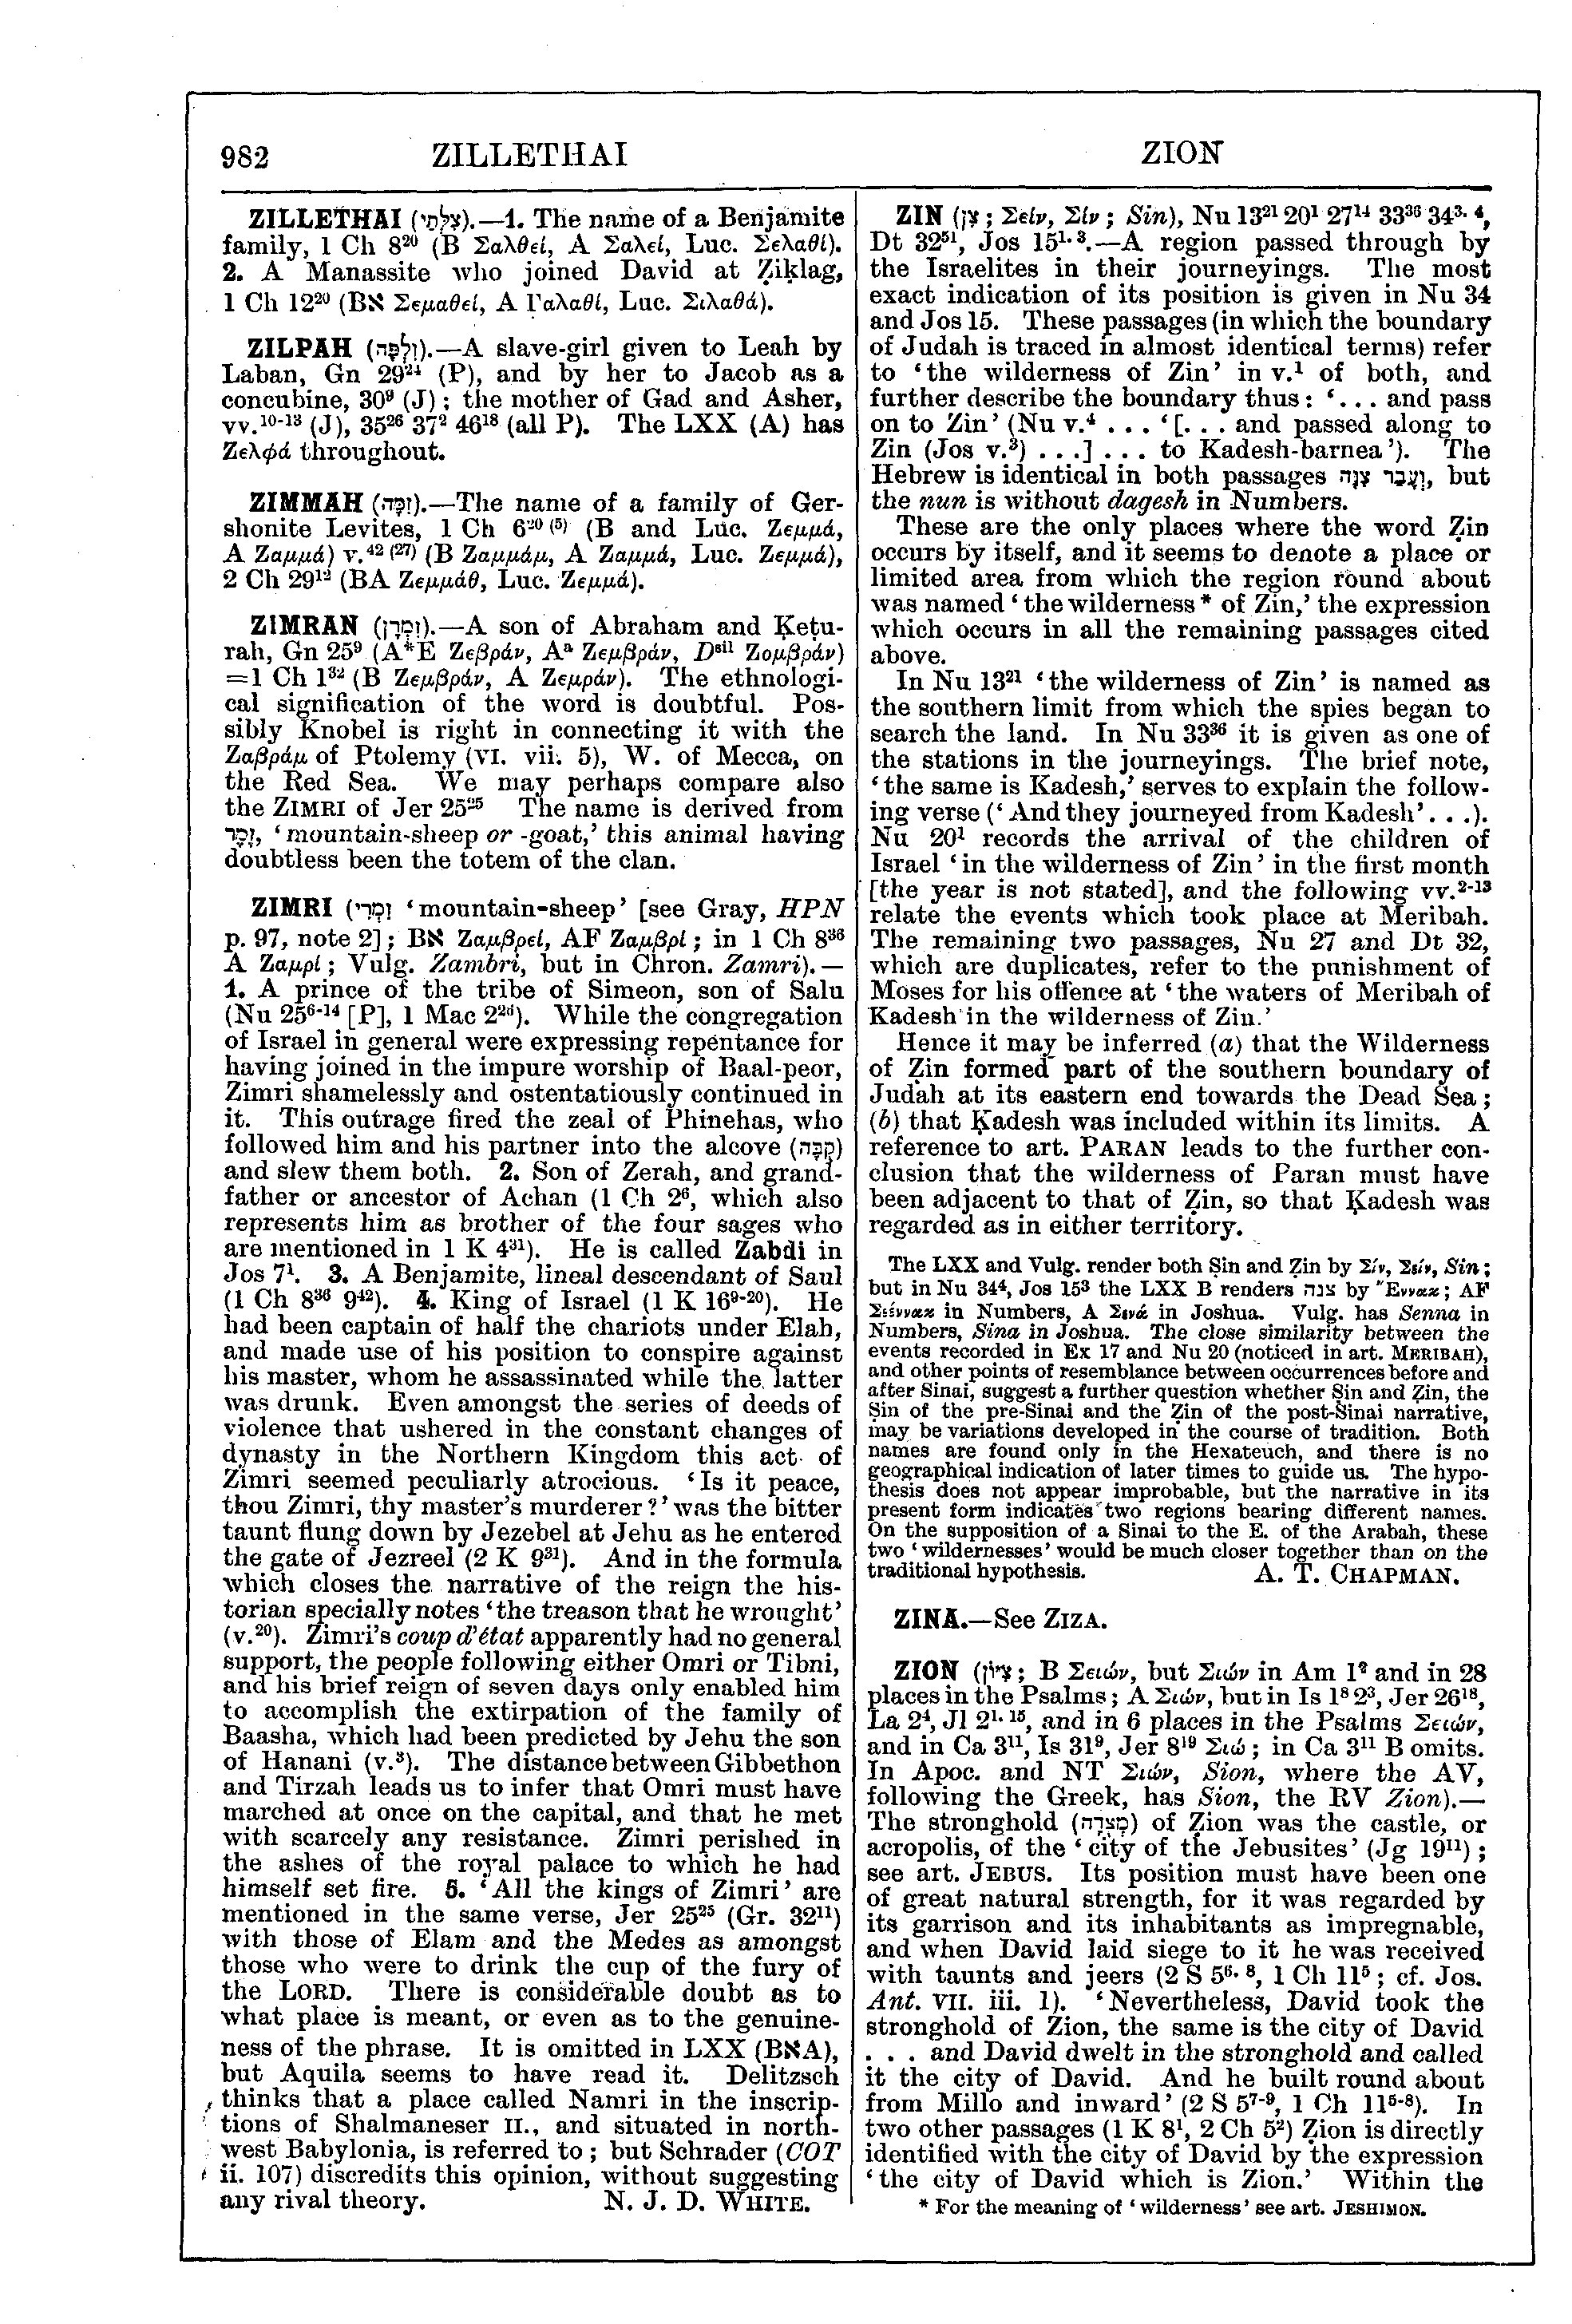 Image of page 982